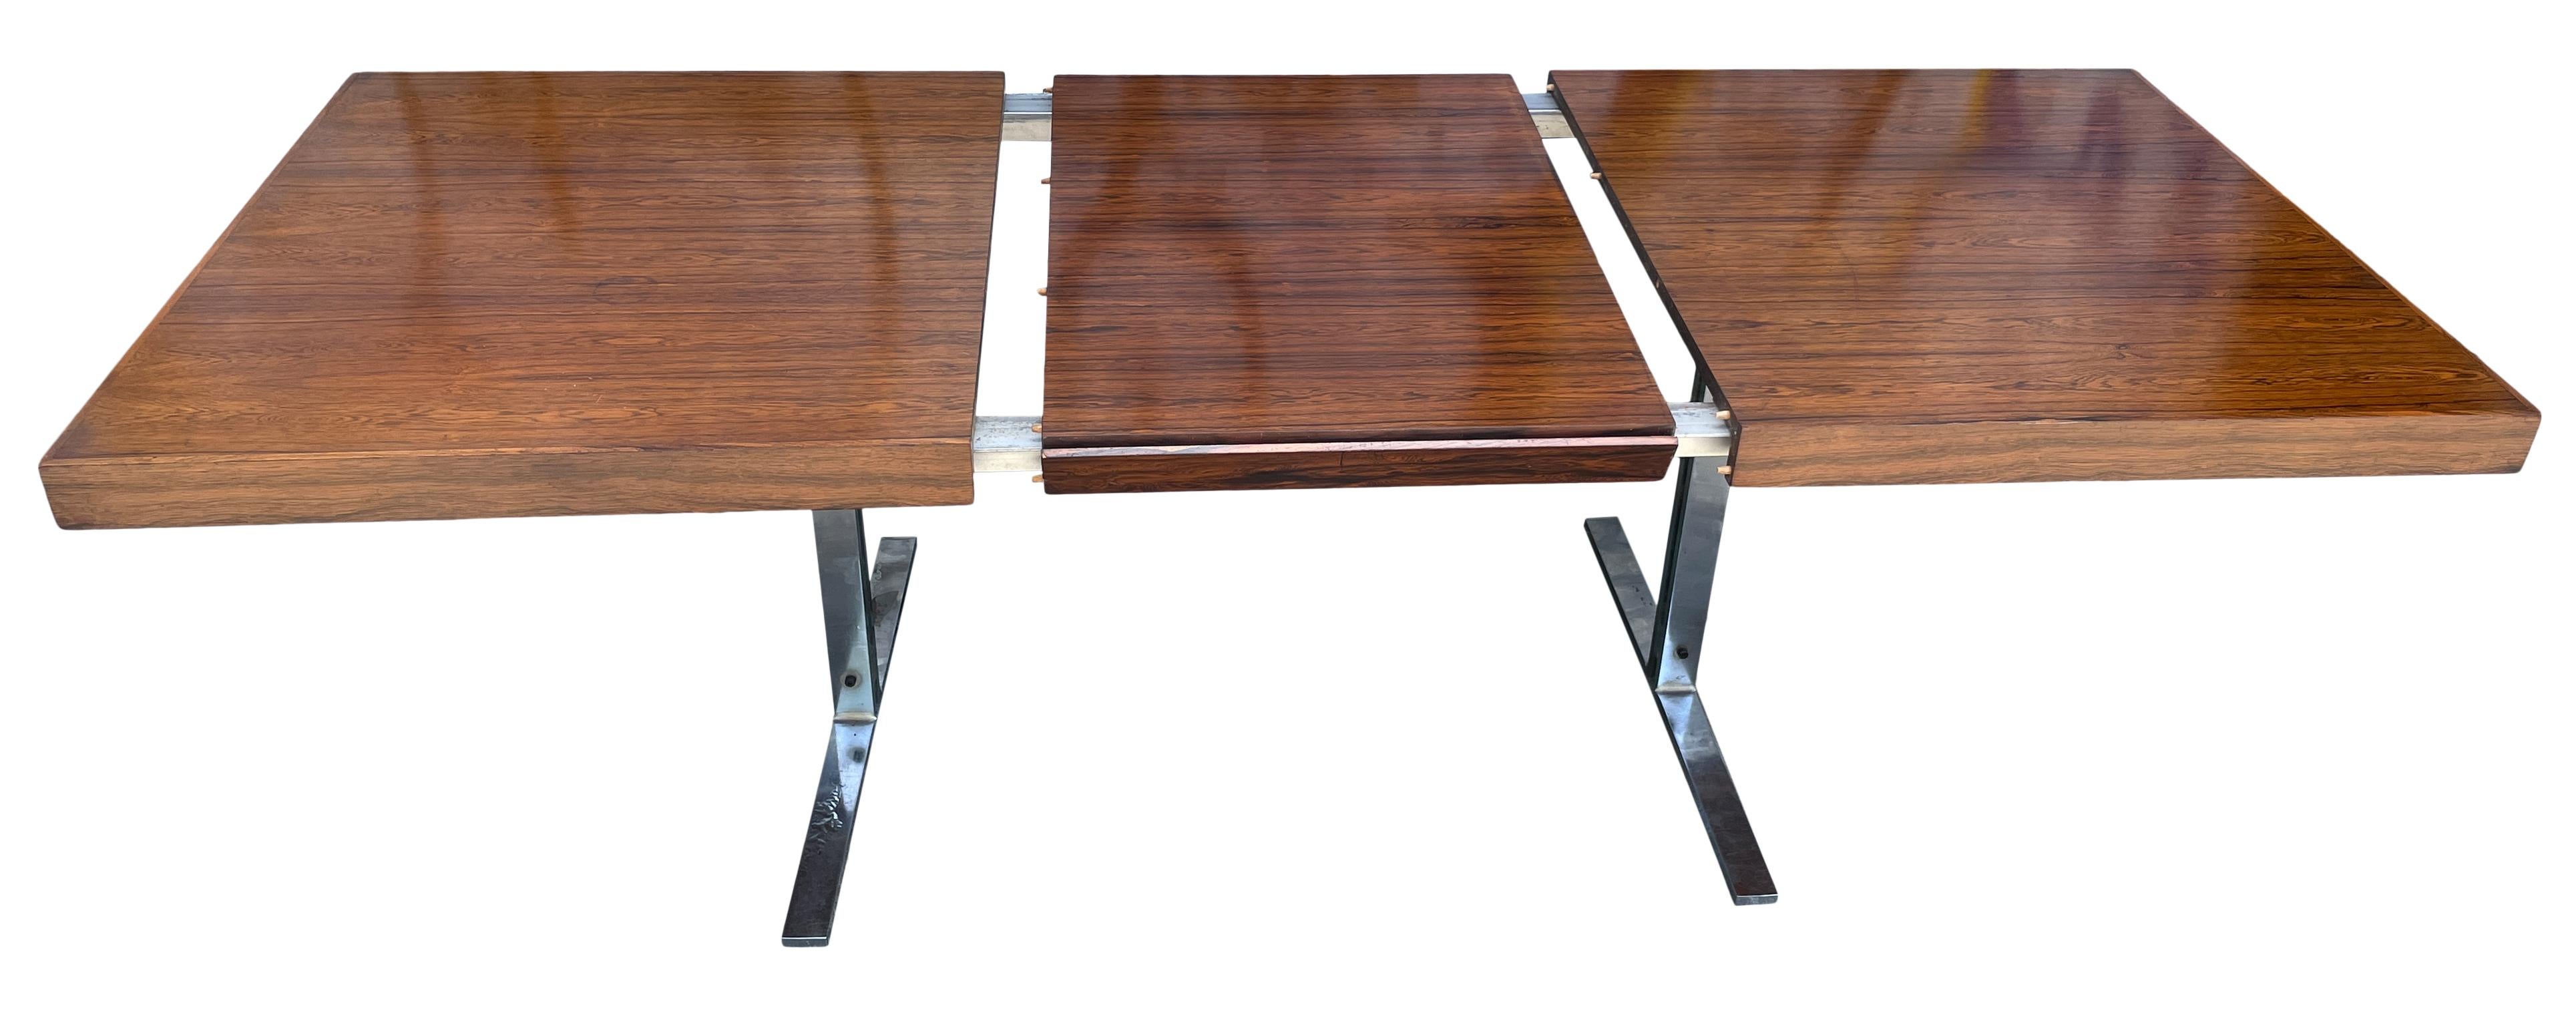 Stunning MidCentury Minimalist Rosewood Dining Table 1 Leaf by Georg Petersens For Sale 2